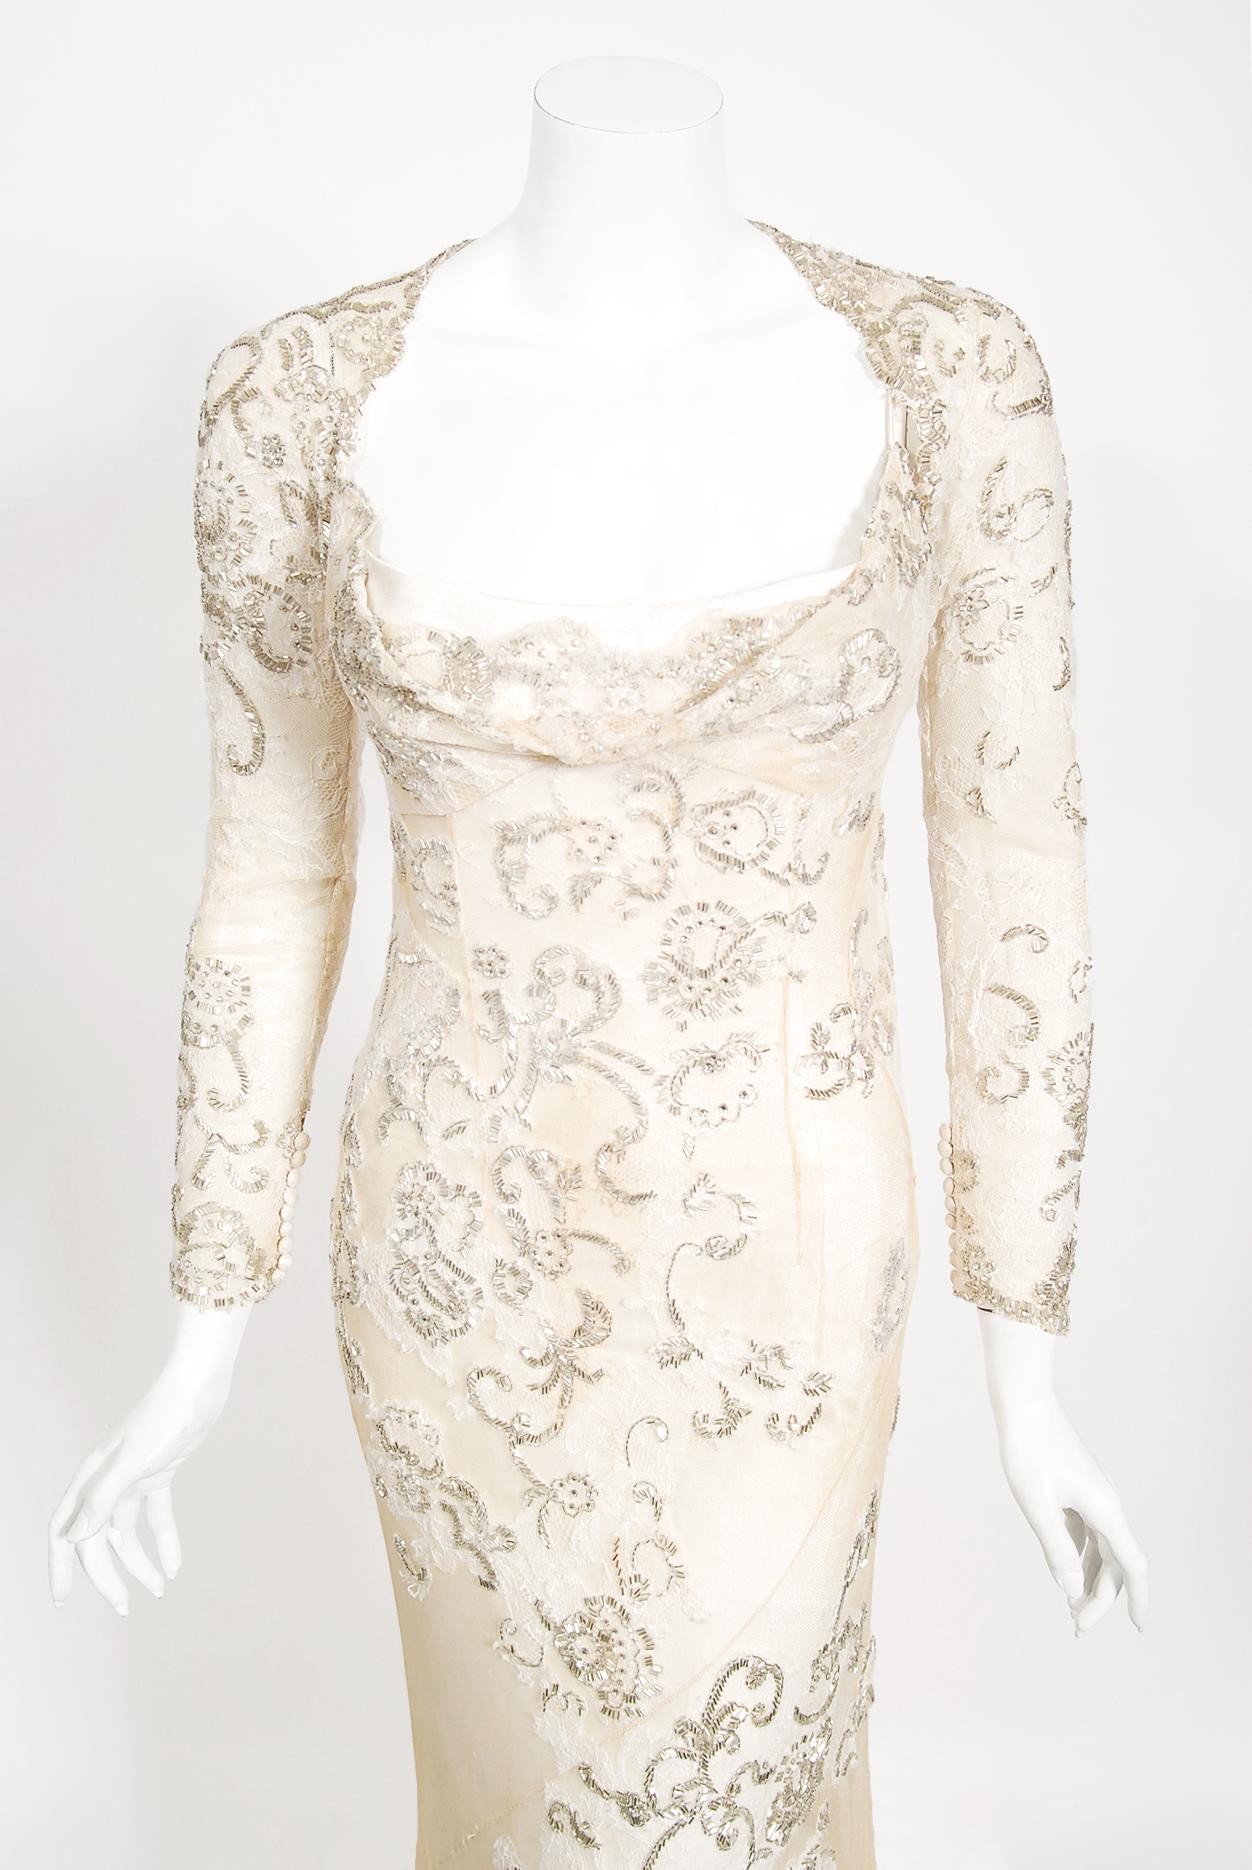 A breathtaking and highly desirable Christian Dior haute couture beaded lace bias-cut trained wedding gown with matching cropped bolero jacket. This incredibly rare numbered Christian Dior treasure from John Galliano's 2003 spring-summer collection